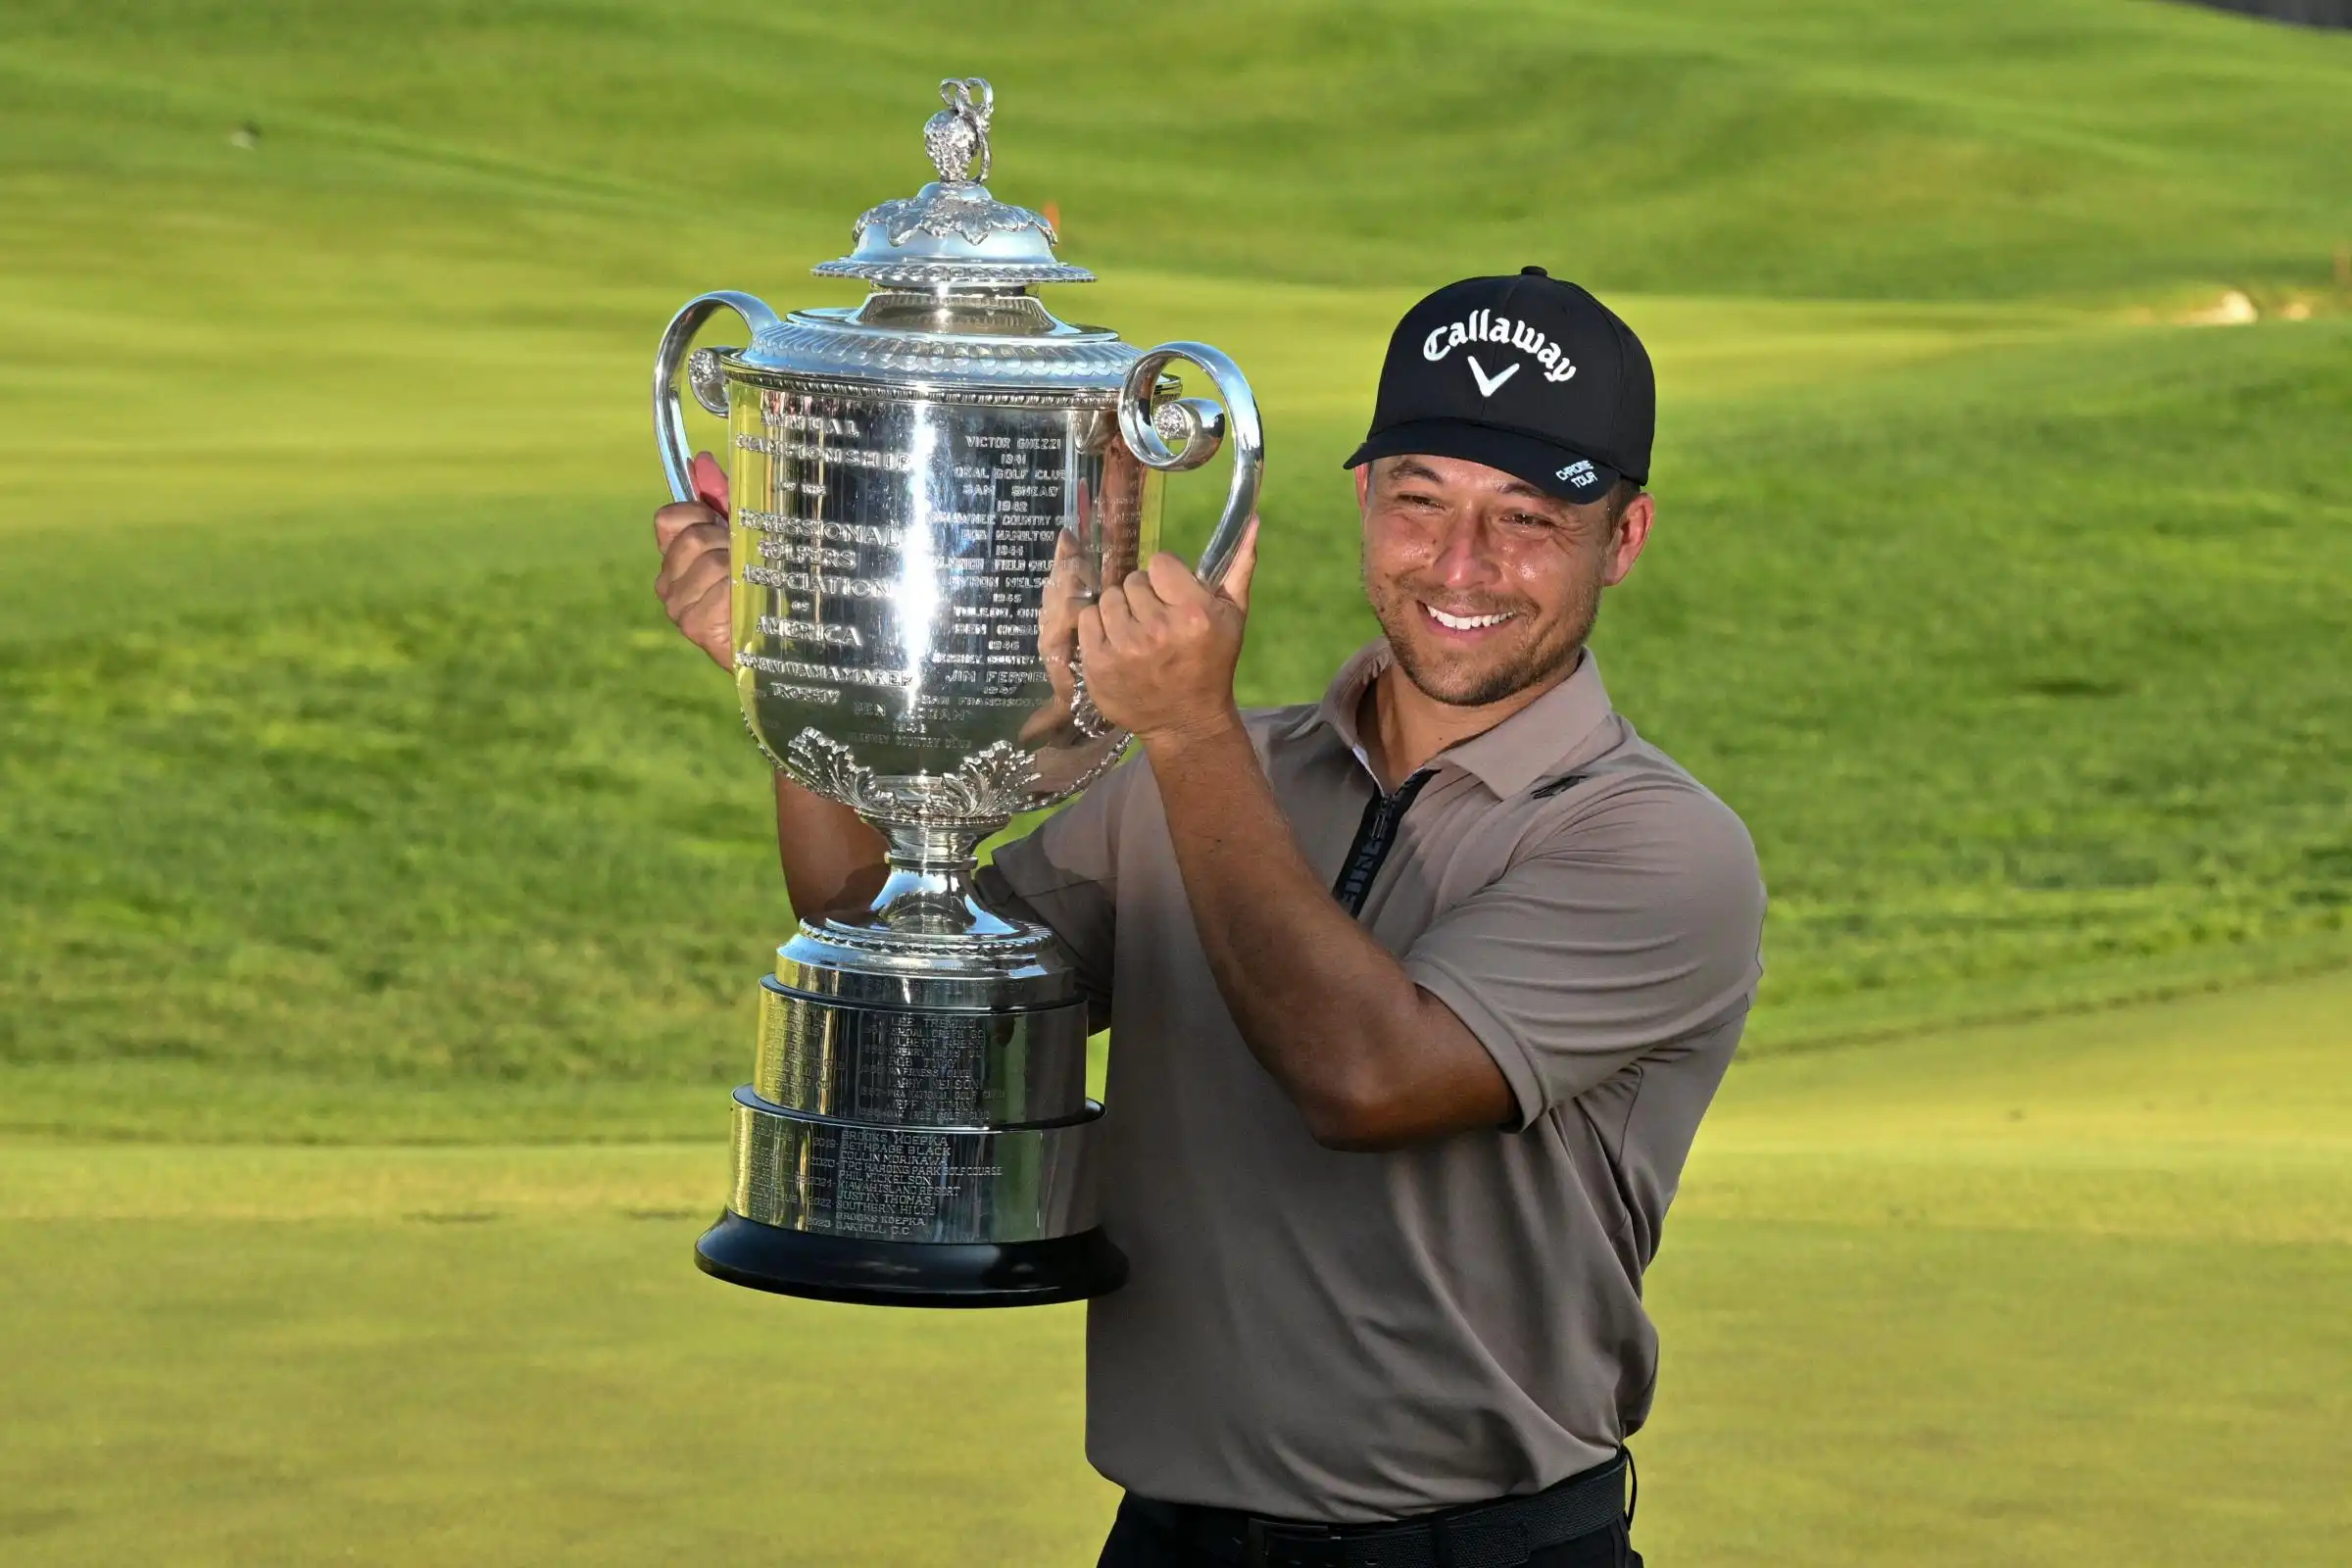 Xander Schauffele clinches first major title with 'awesome' birdie